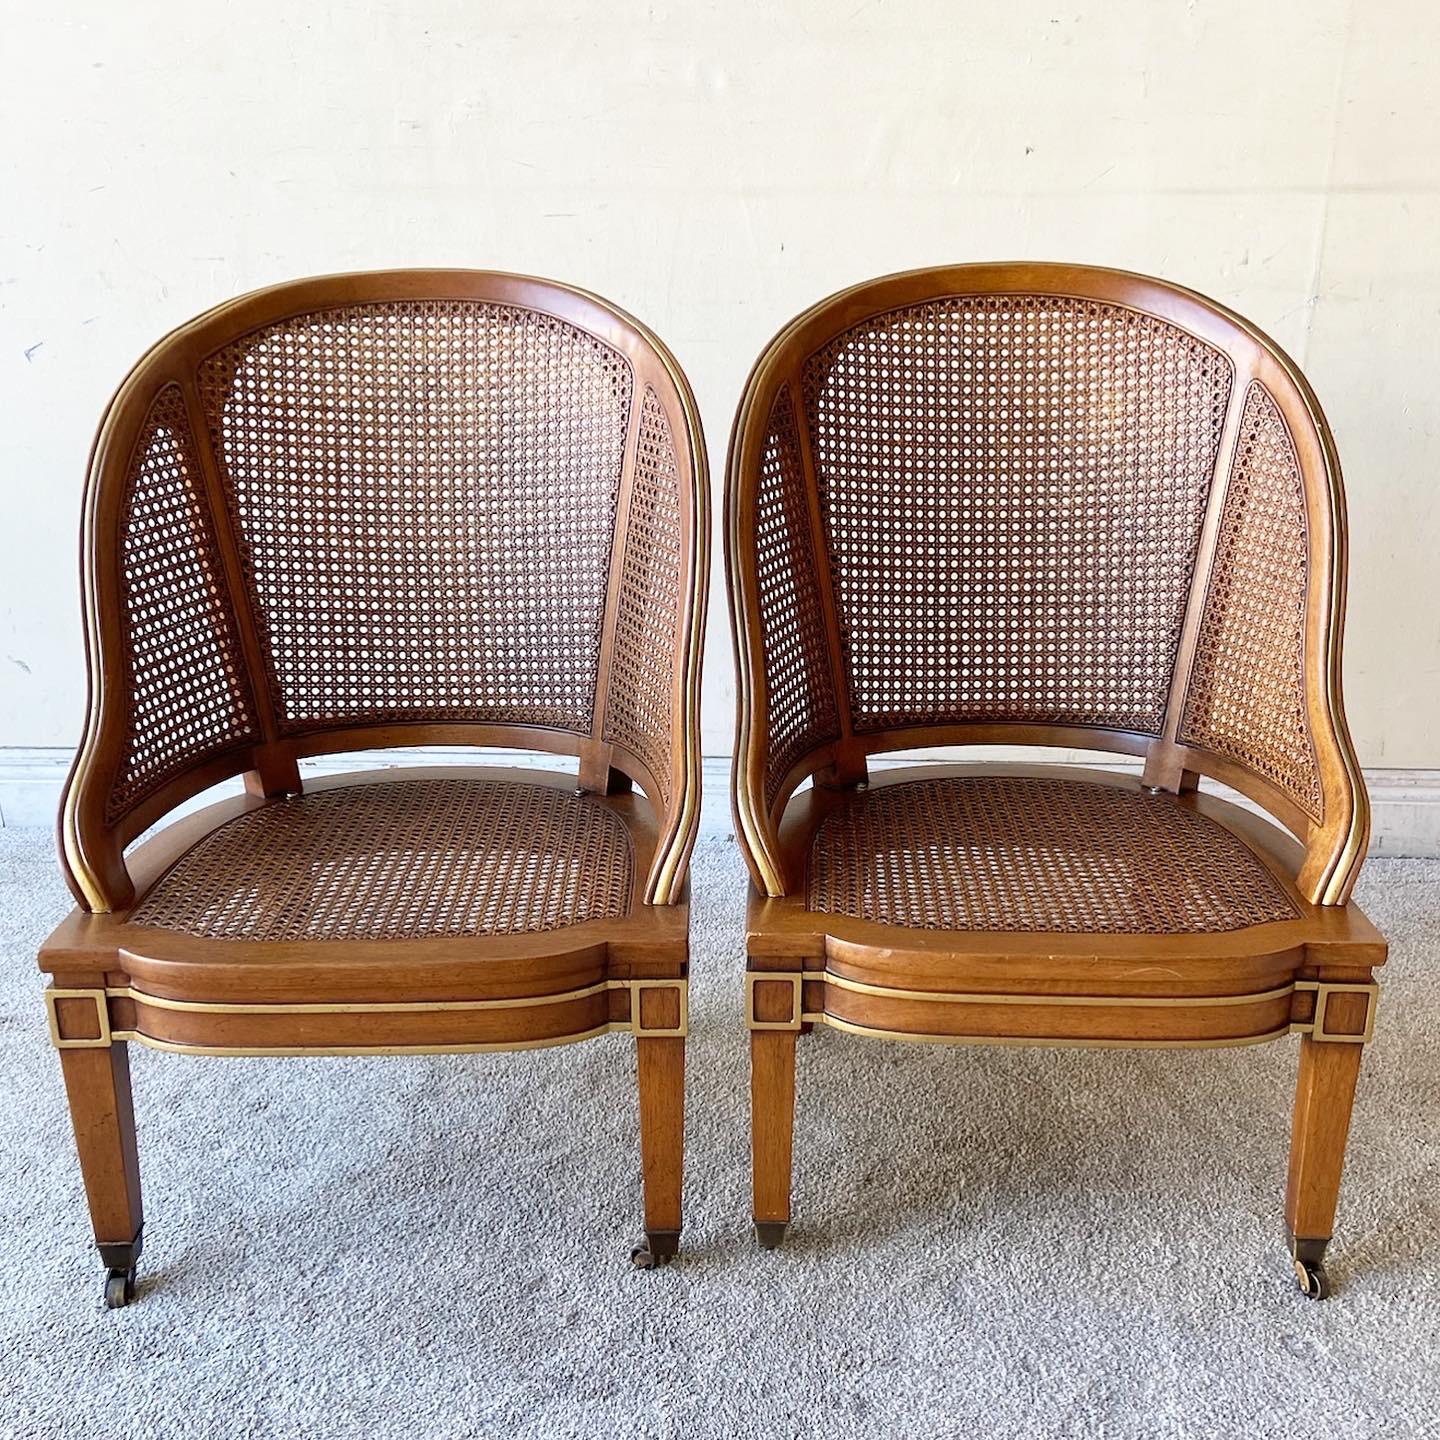 Exceptional pair of early 20th century club chairs on casters. Each seat features came through out the sides and seats.
 